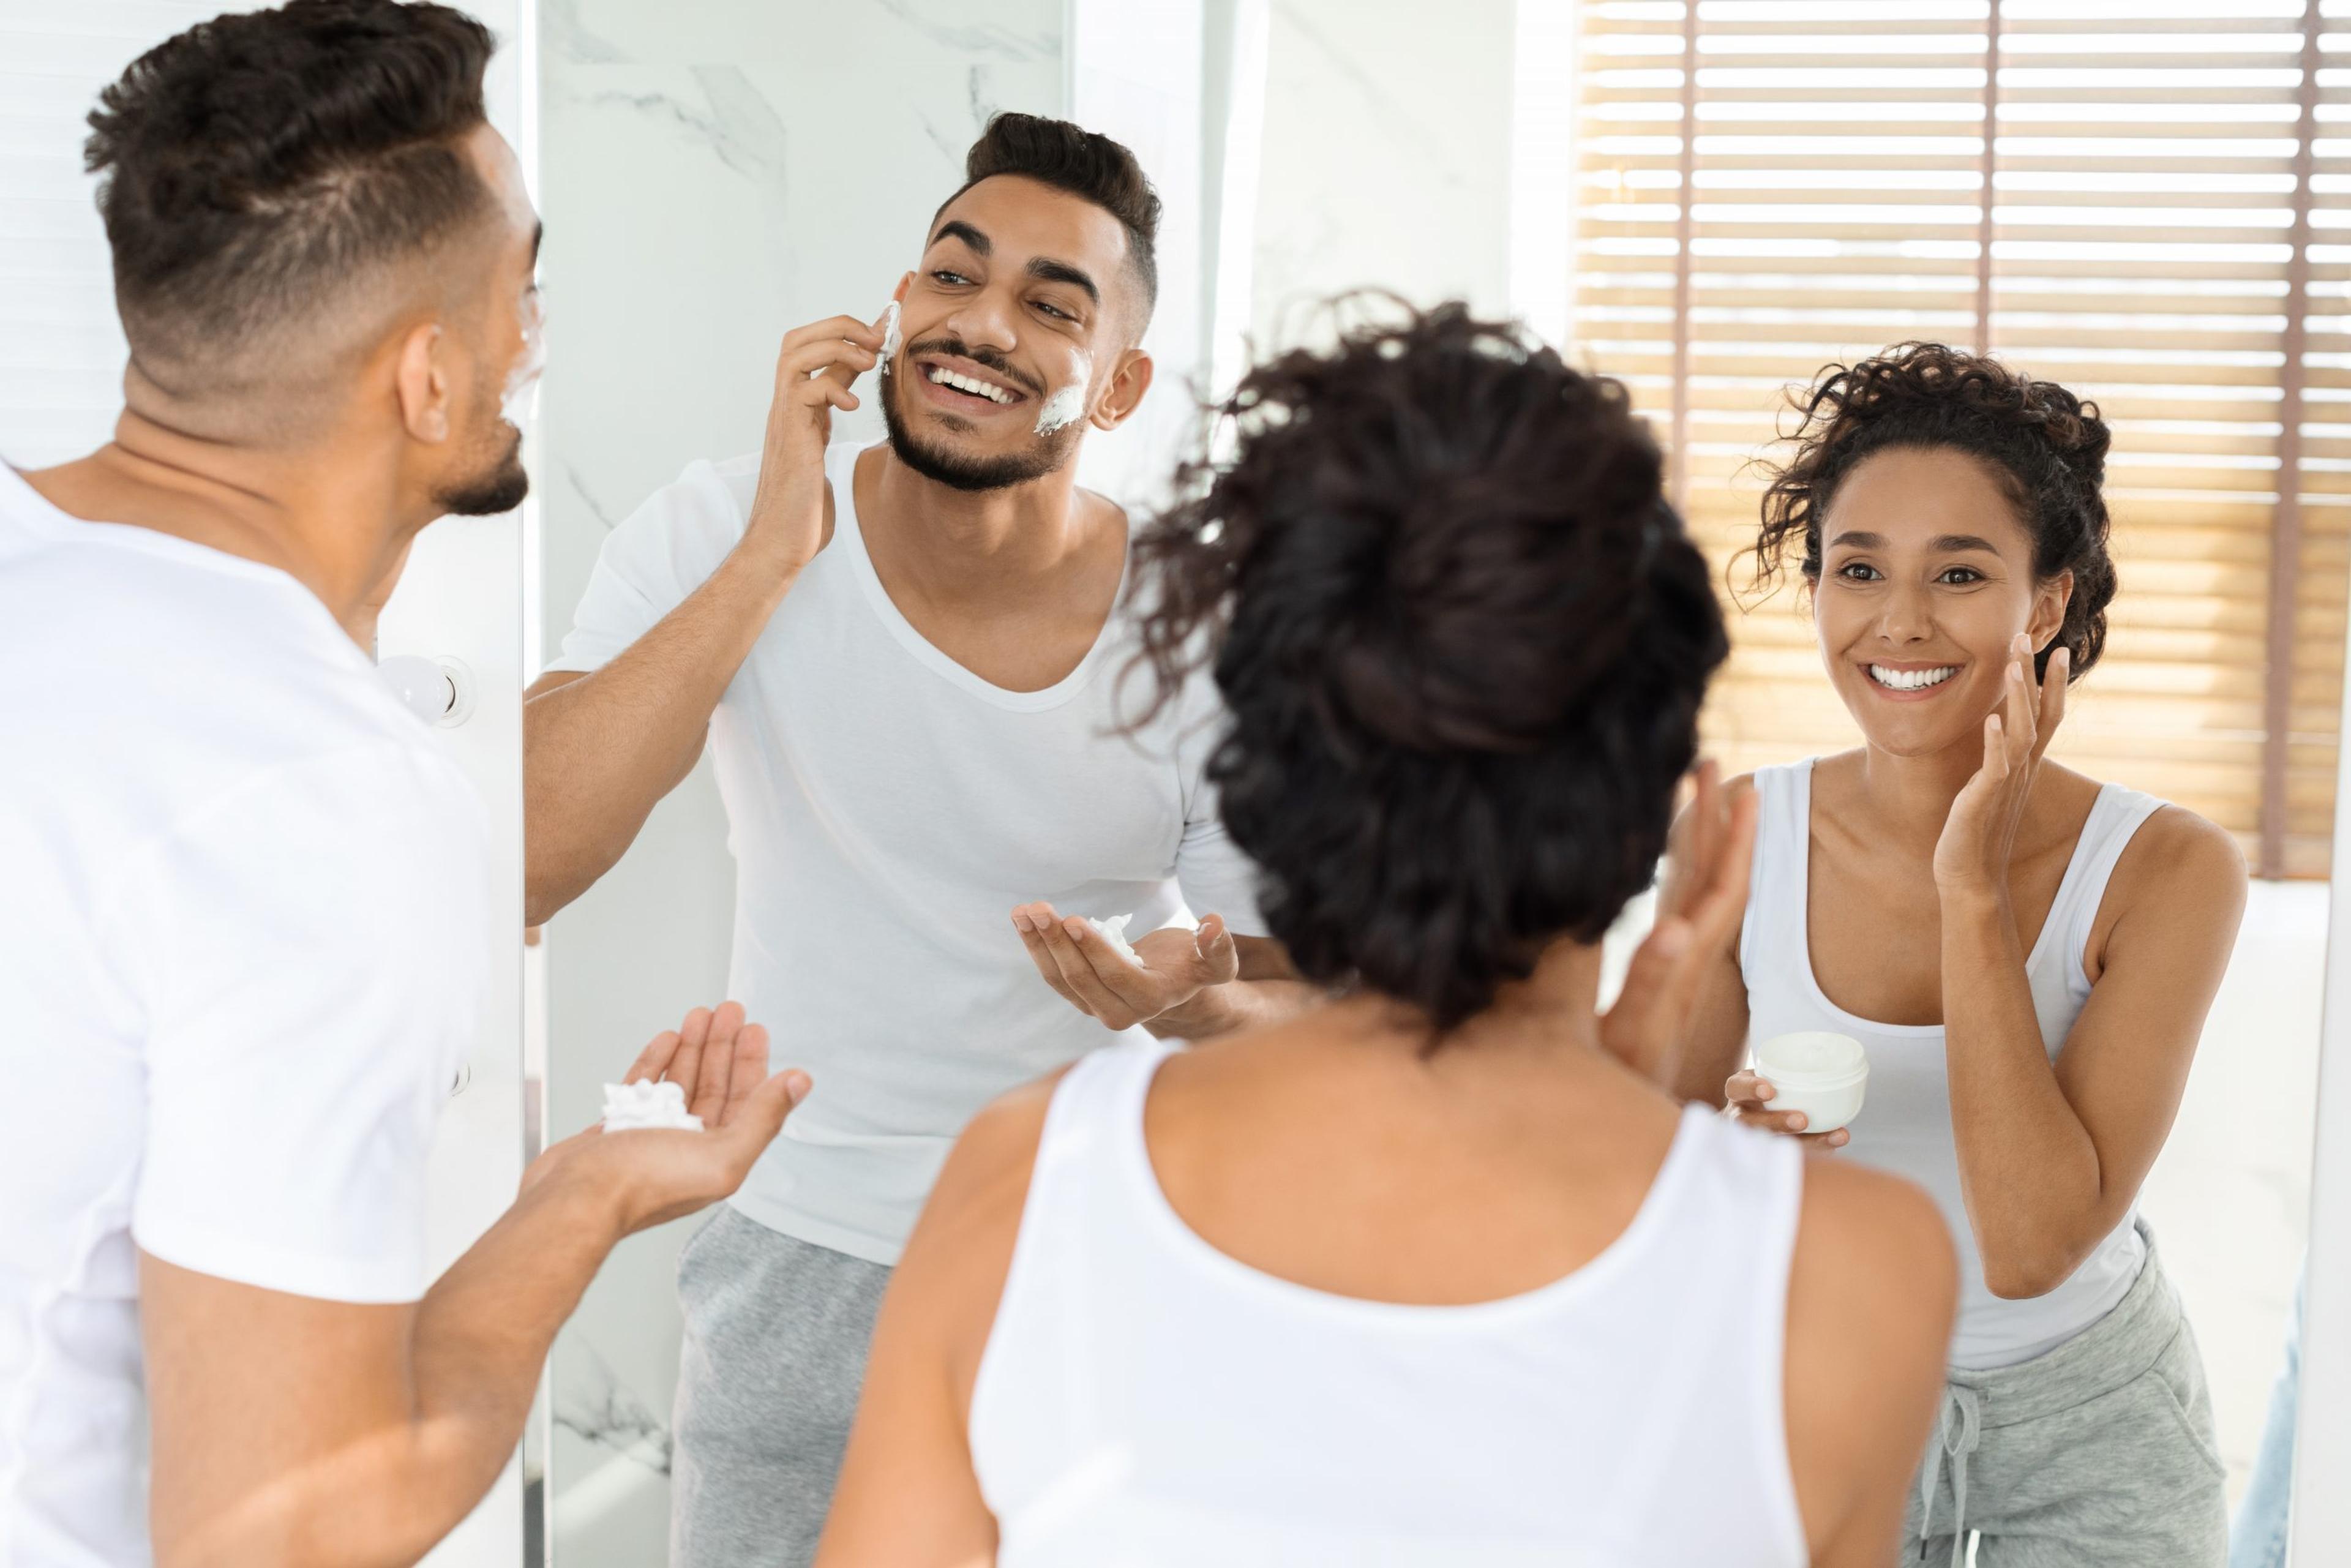 Morning Routine. Happy Young Arab Couple Getting Ready Together Near Mirror In Bathroom, Woman Applying Moisturising Cream While Man Using Shave Foam, Selective Focus On Reflection, Free Space